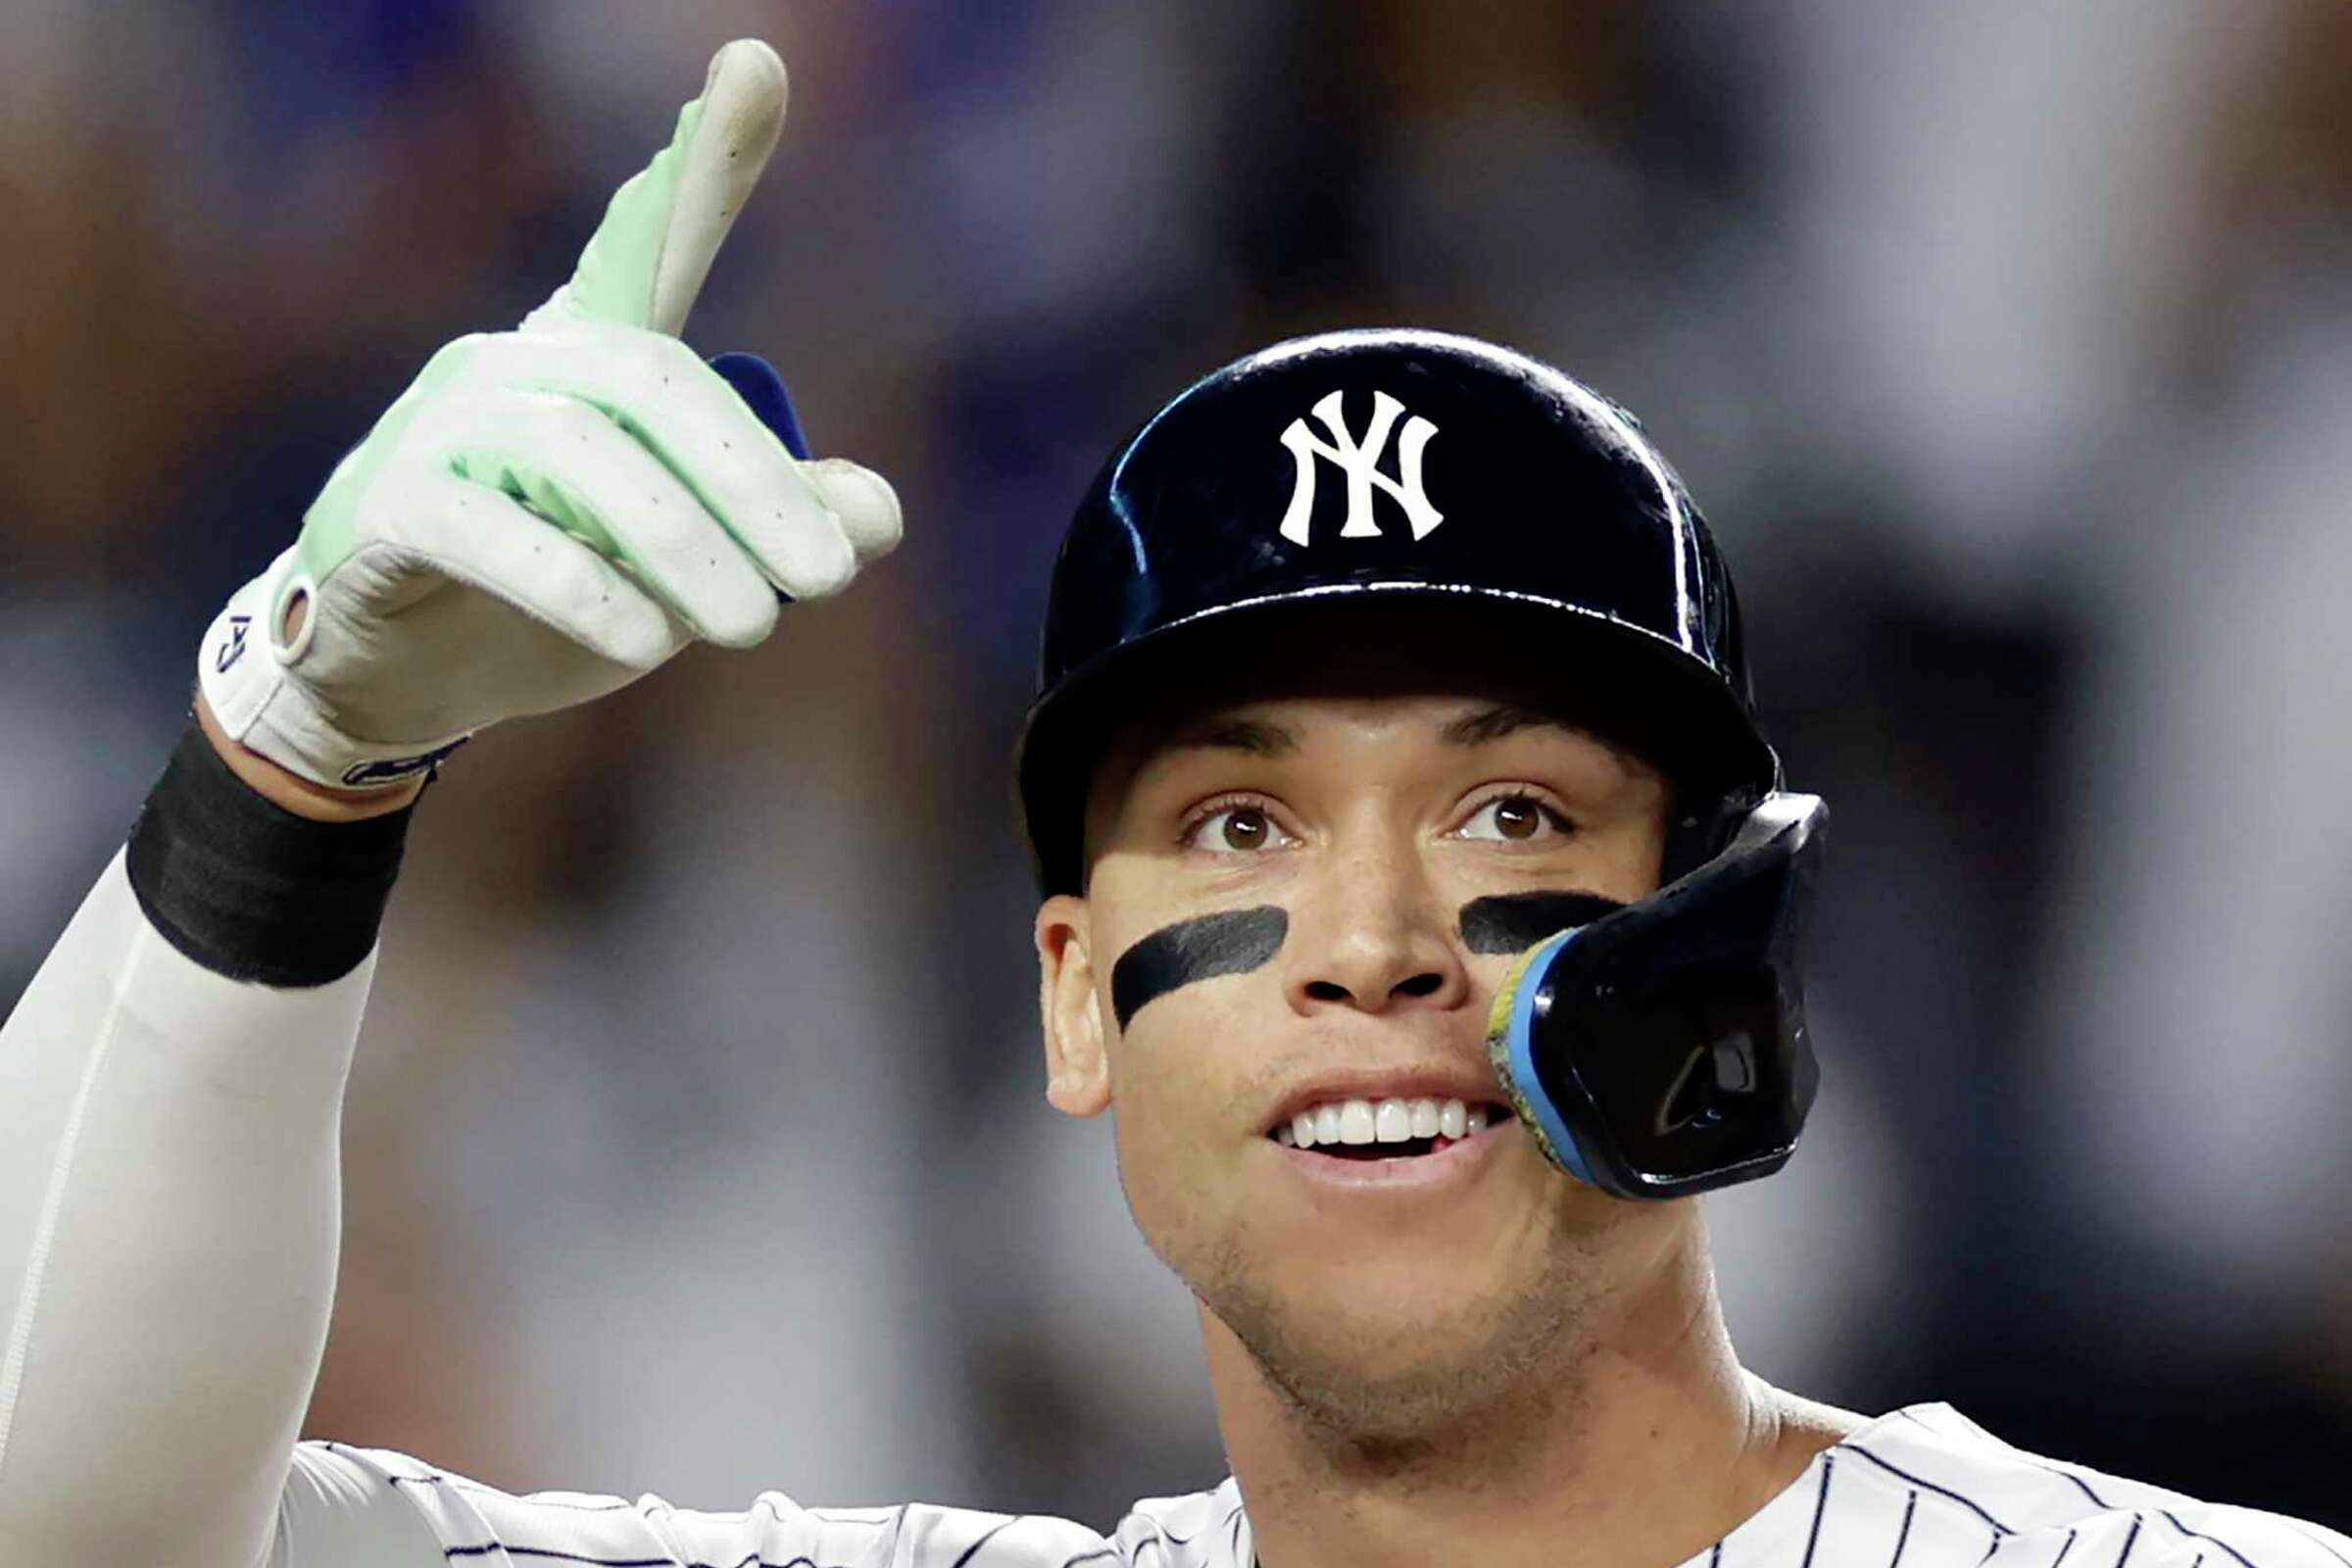 Aaron Judge’s bid to win a Triple Crown something special for MLB history